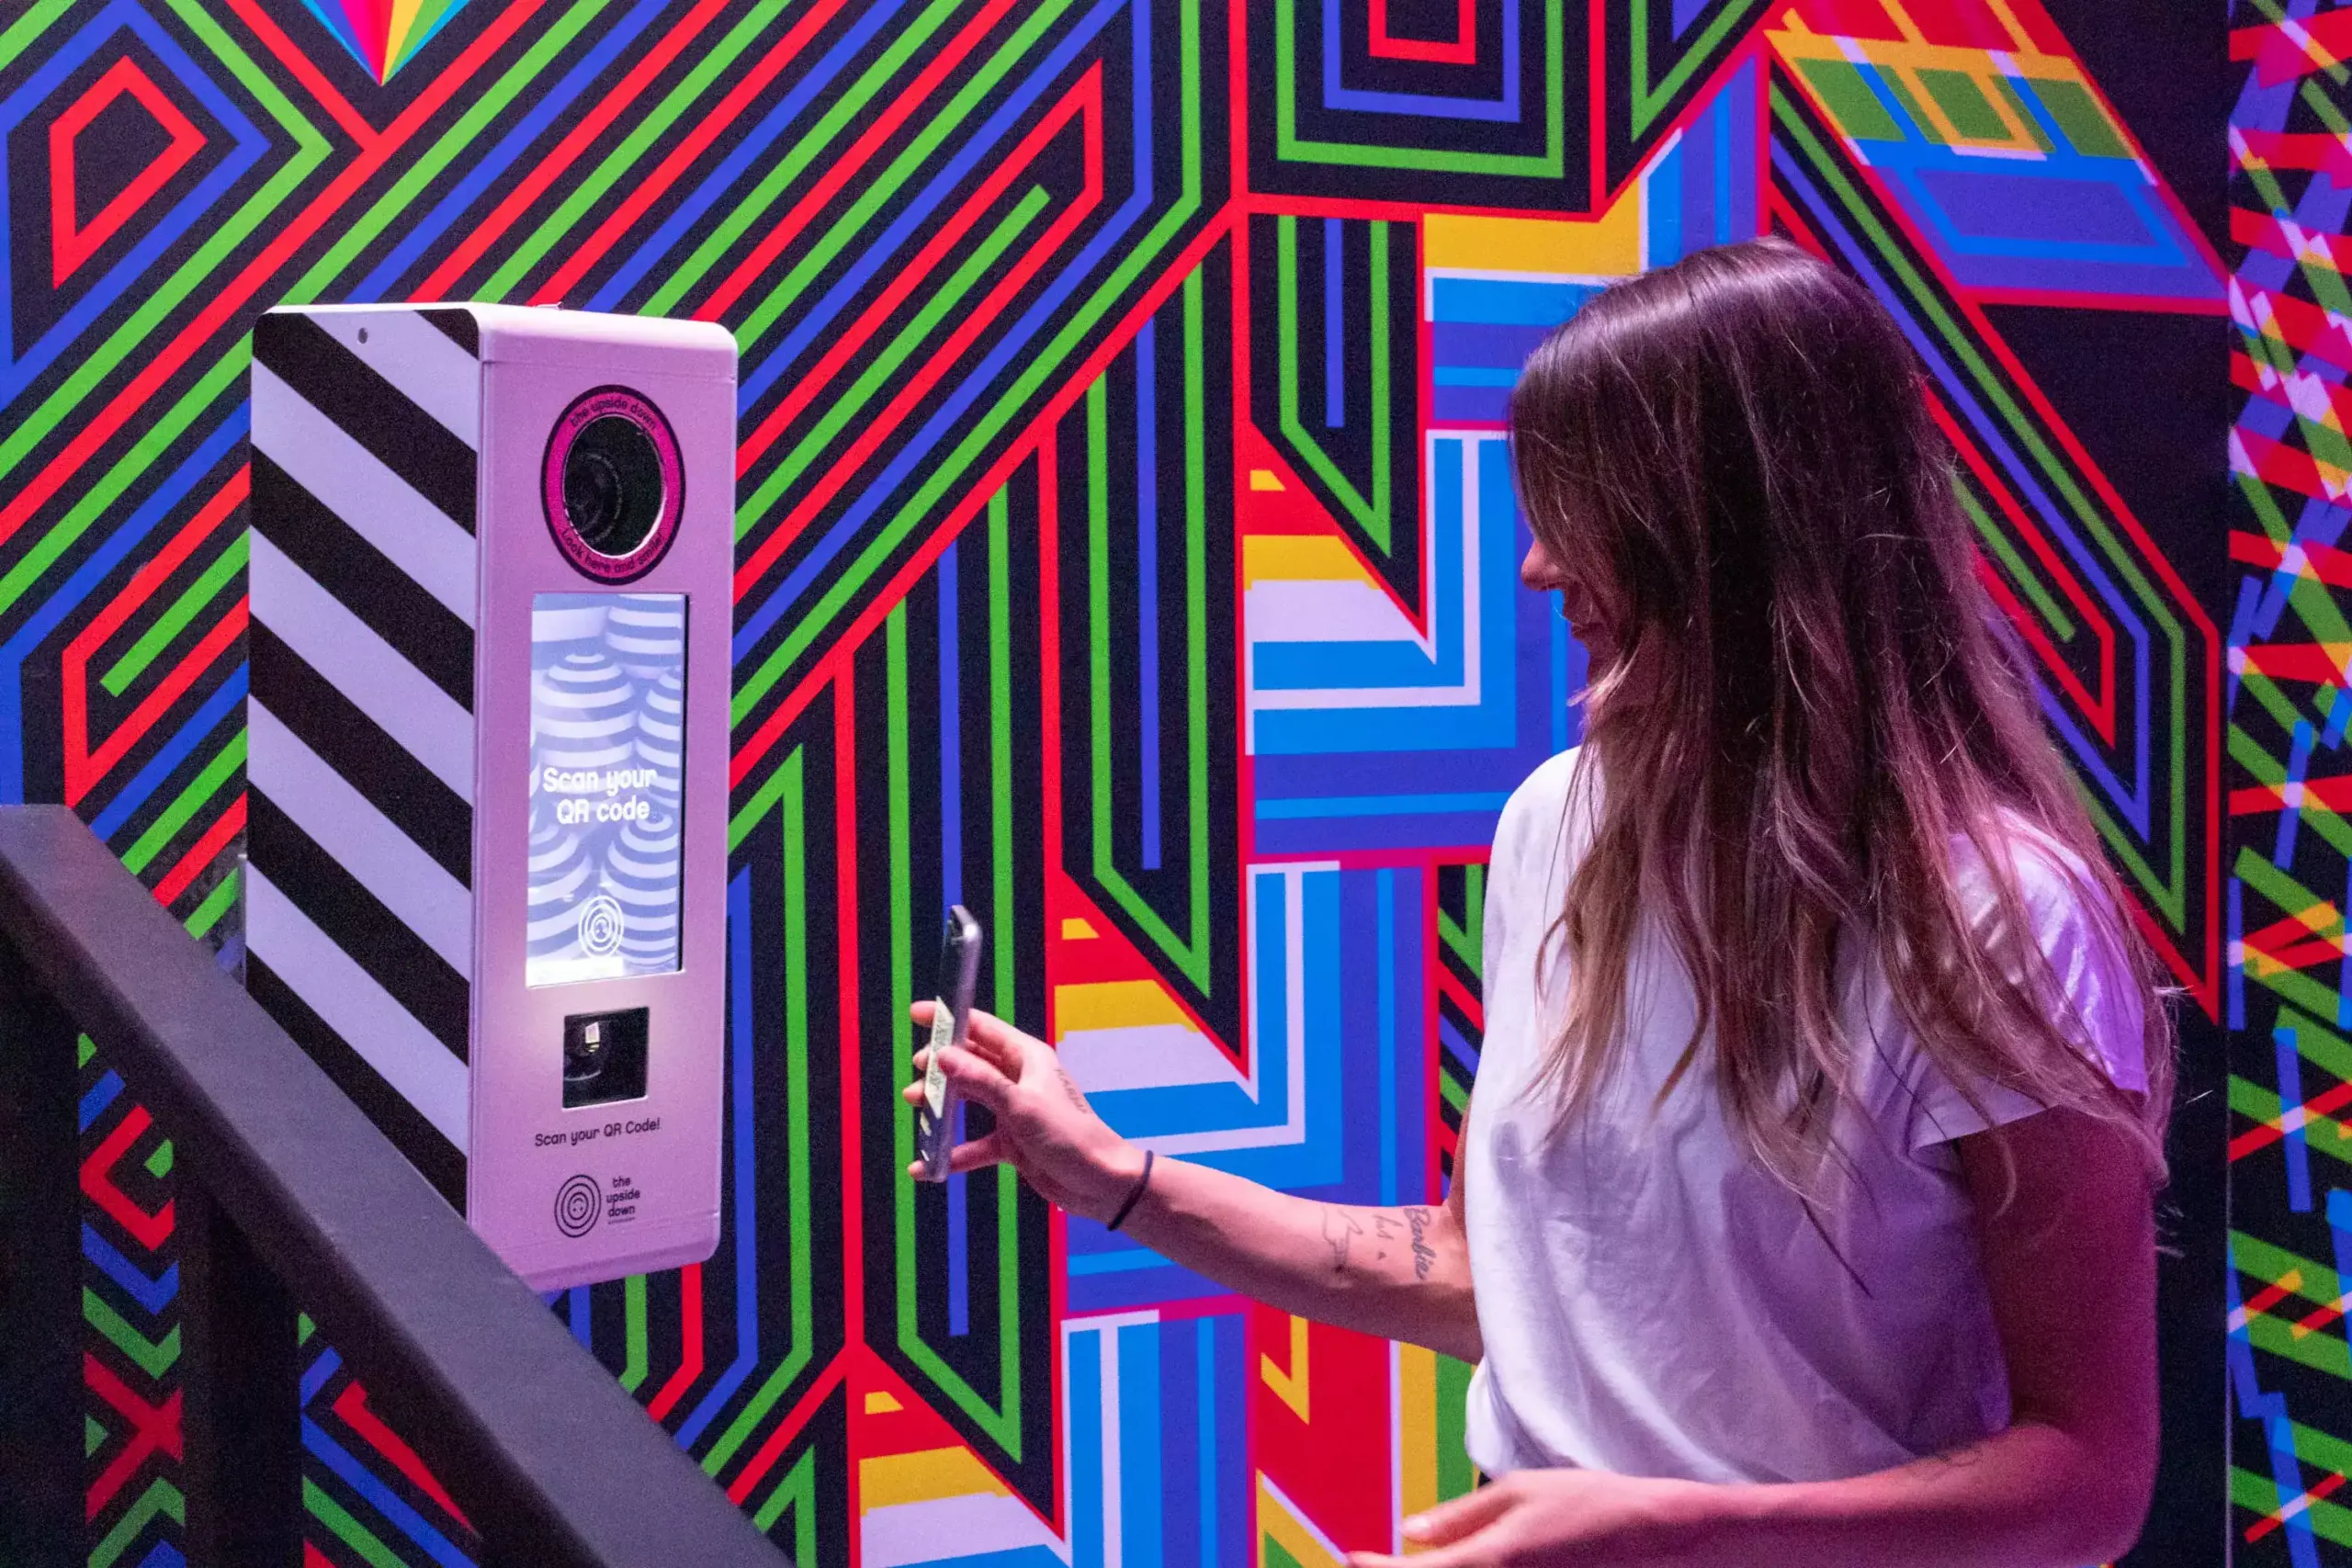 Colorful Scan & Capture photo booth with vibrant geometric patterns, designed for engaging and immersive guest experiences.
